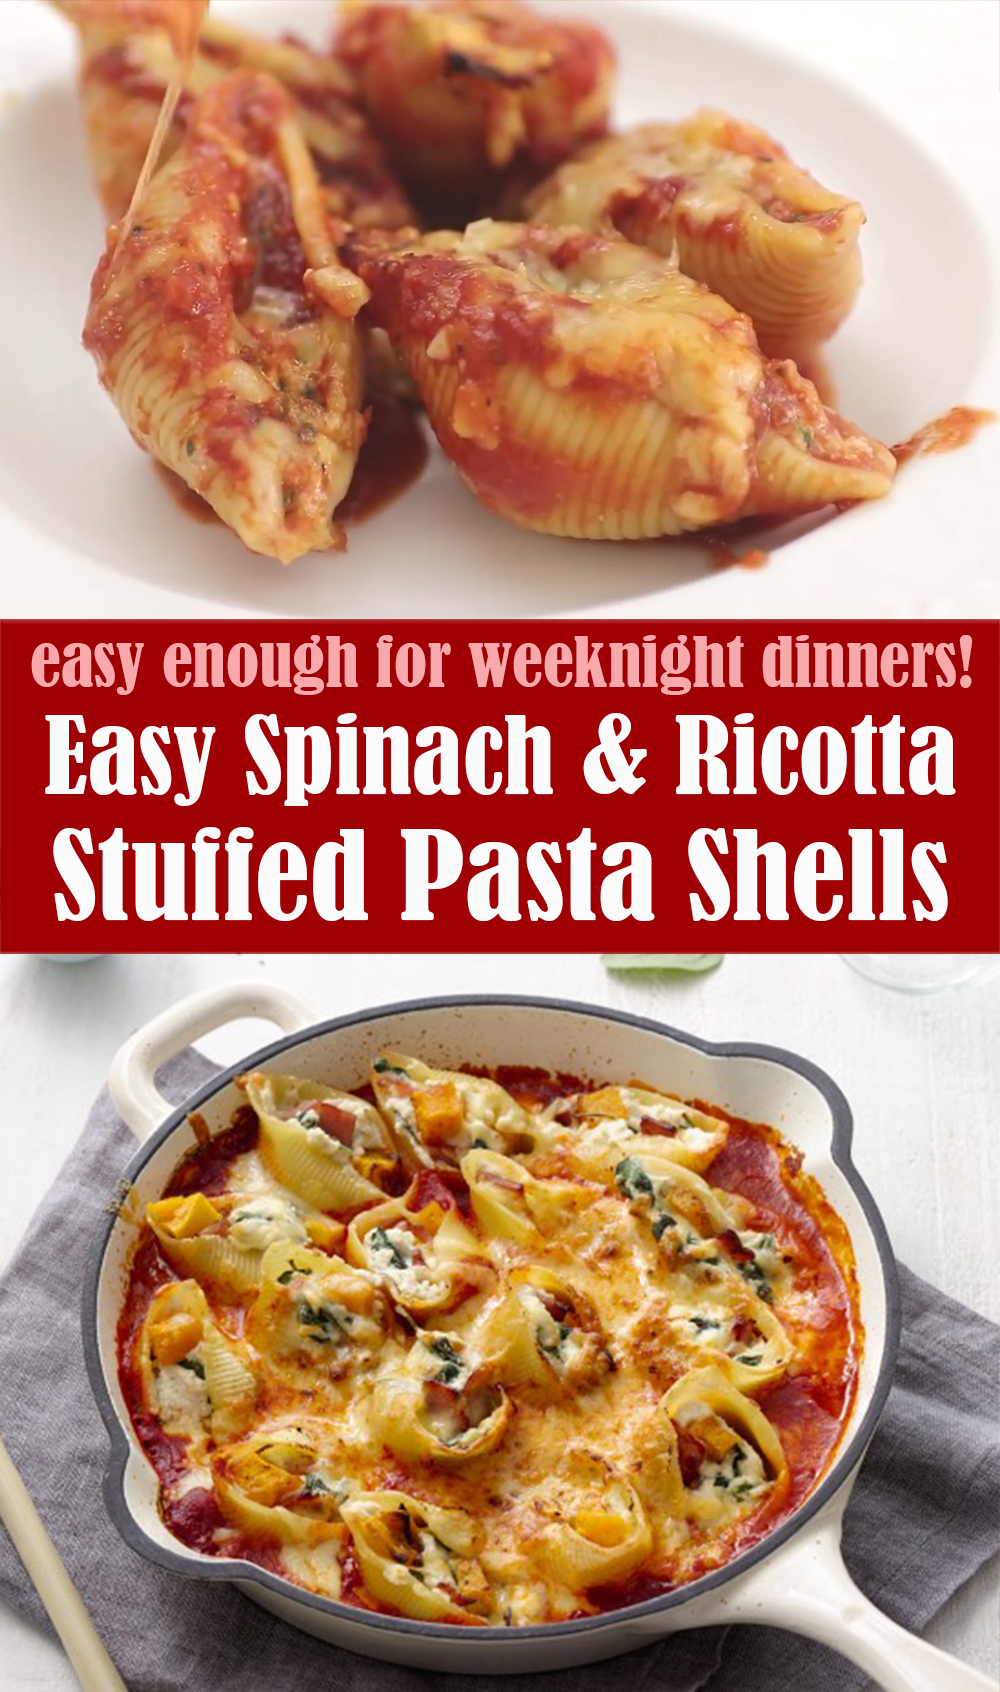 Easy Spinach and Ricotta Stuffed Pasta Shells